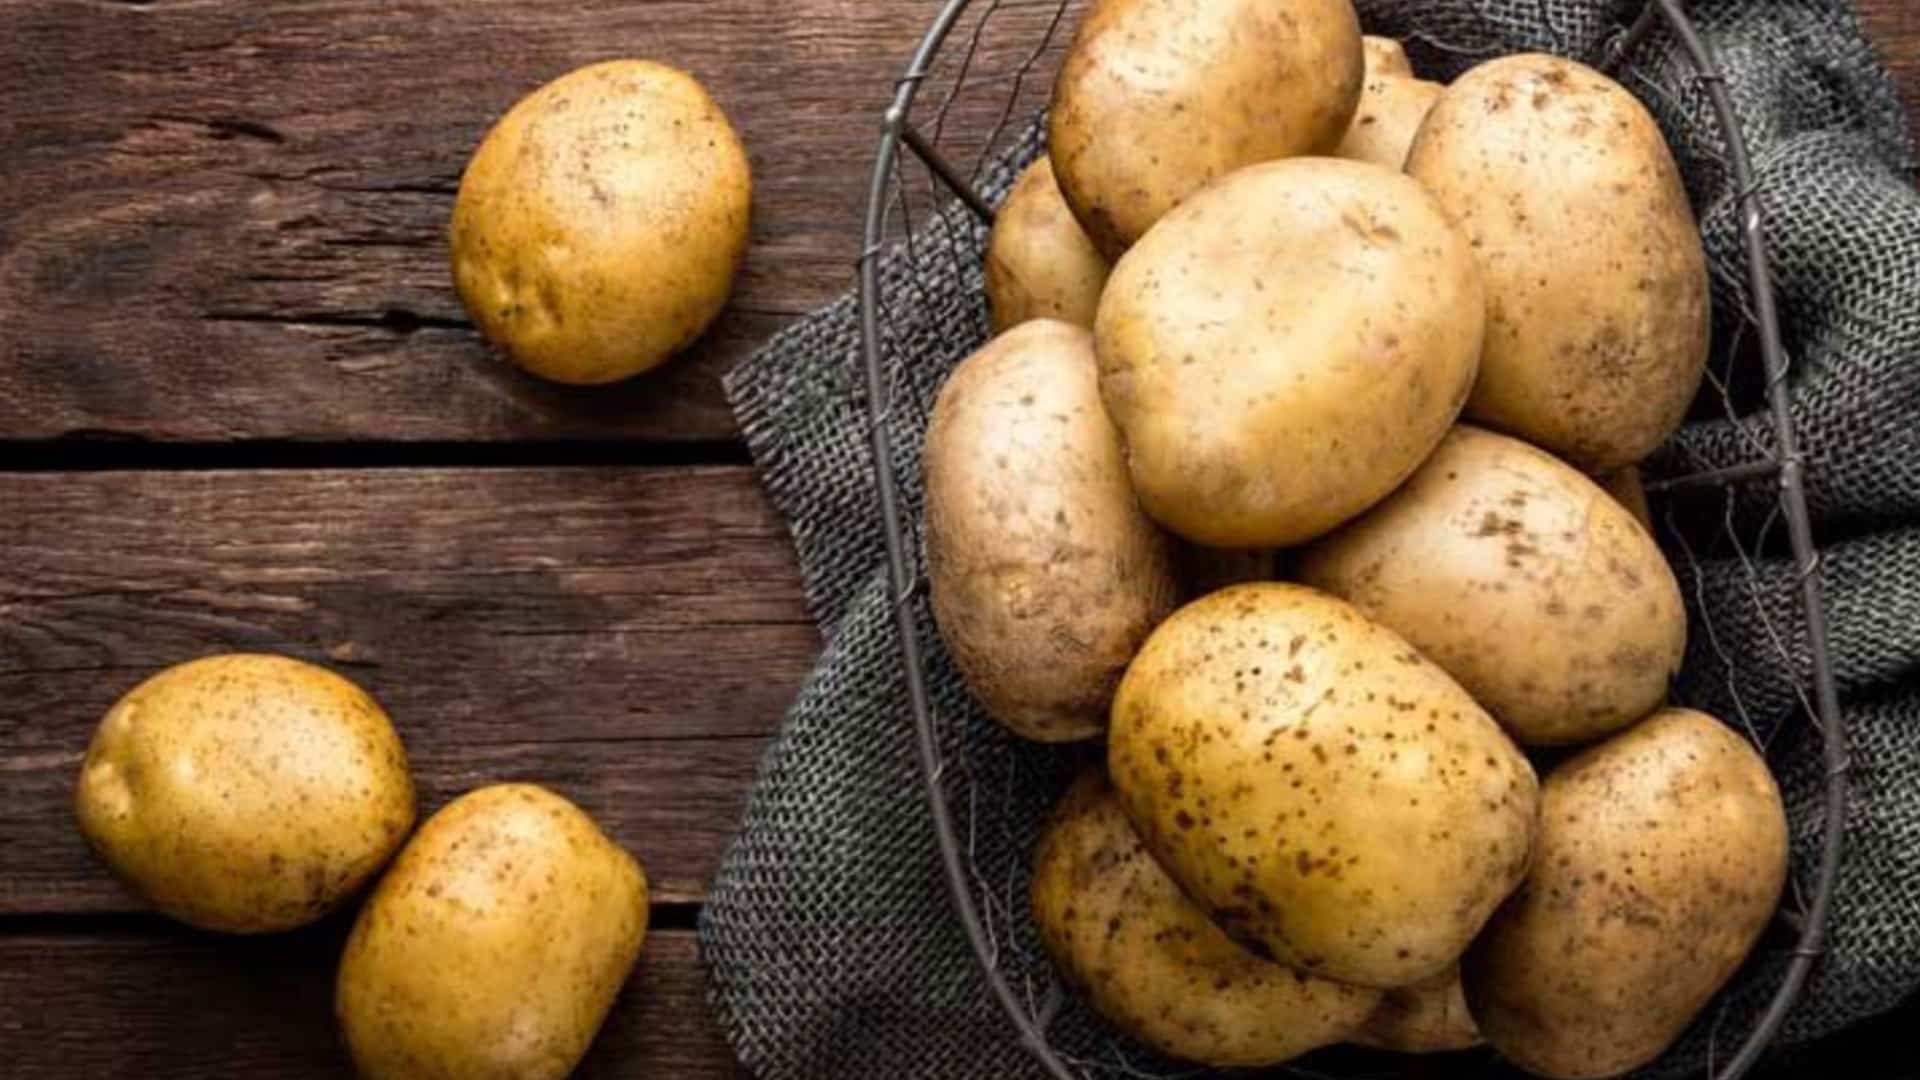 Free Farm Friday- How Do You Grow Your Own Awesome Taters? Like This